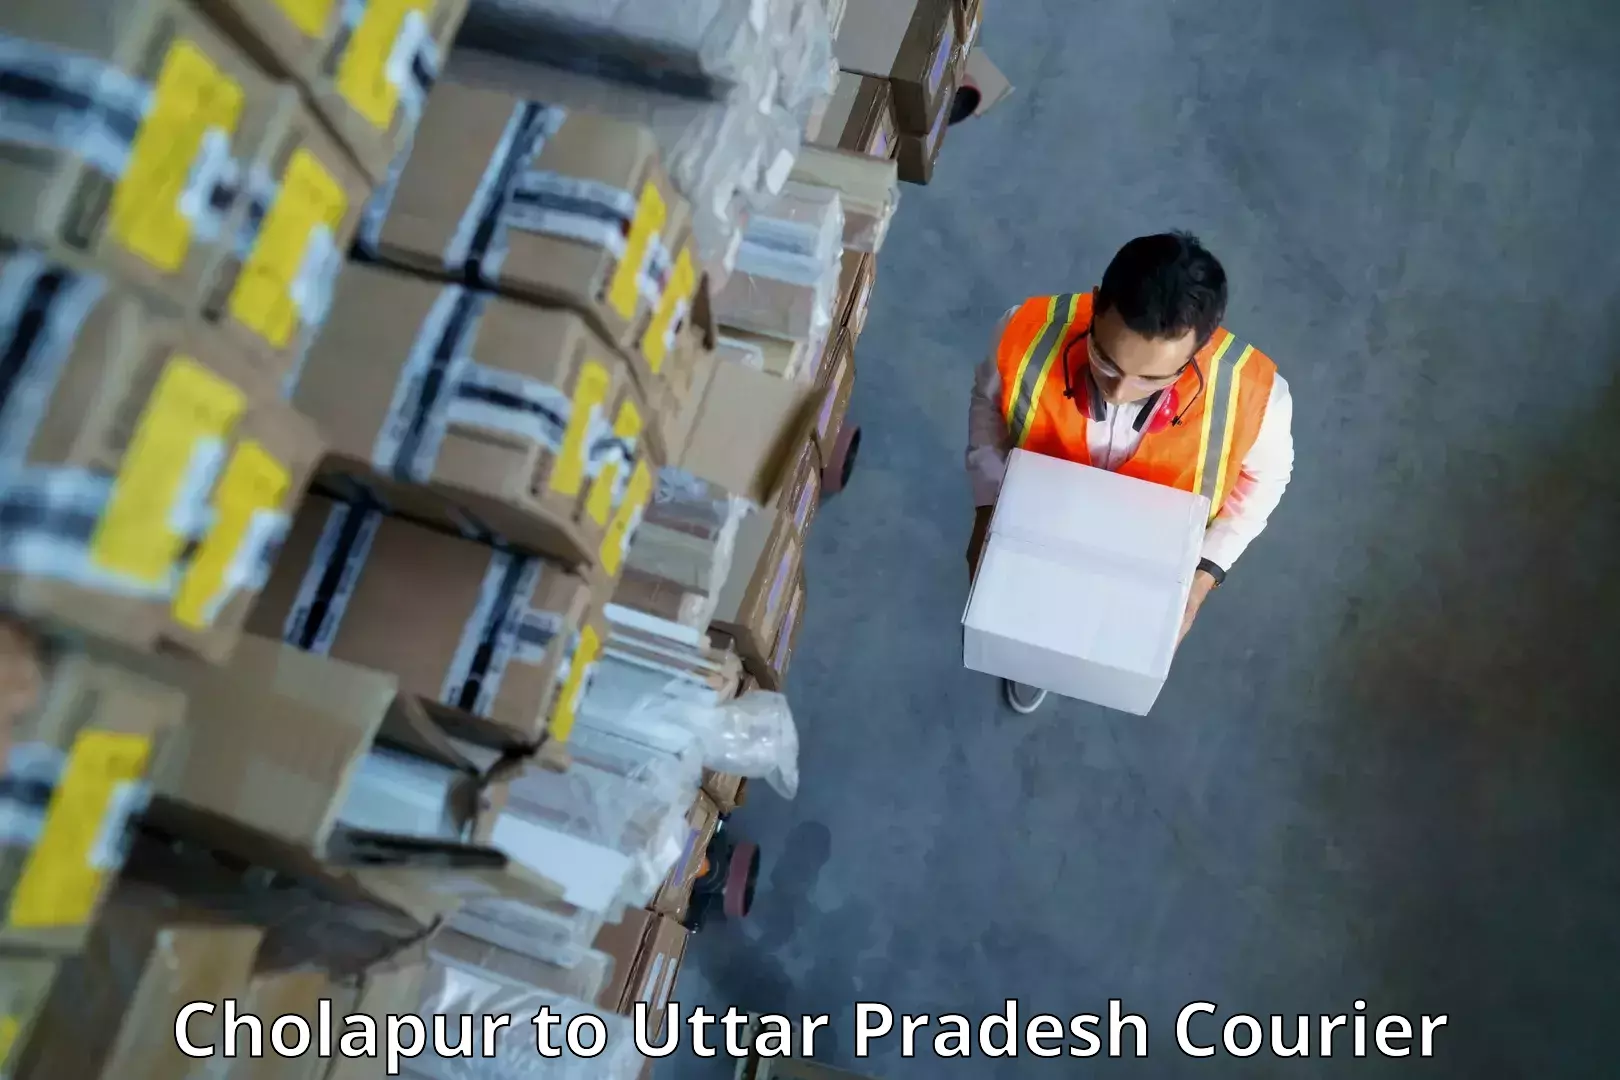 Modern courier technology Cholapur to Aligarh